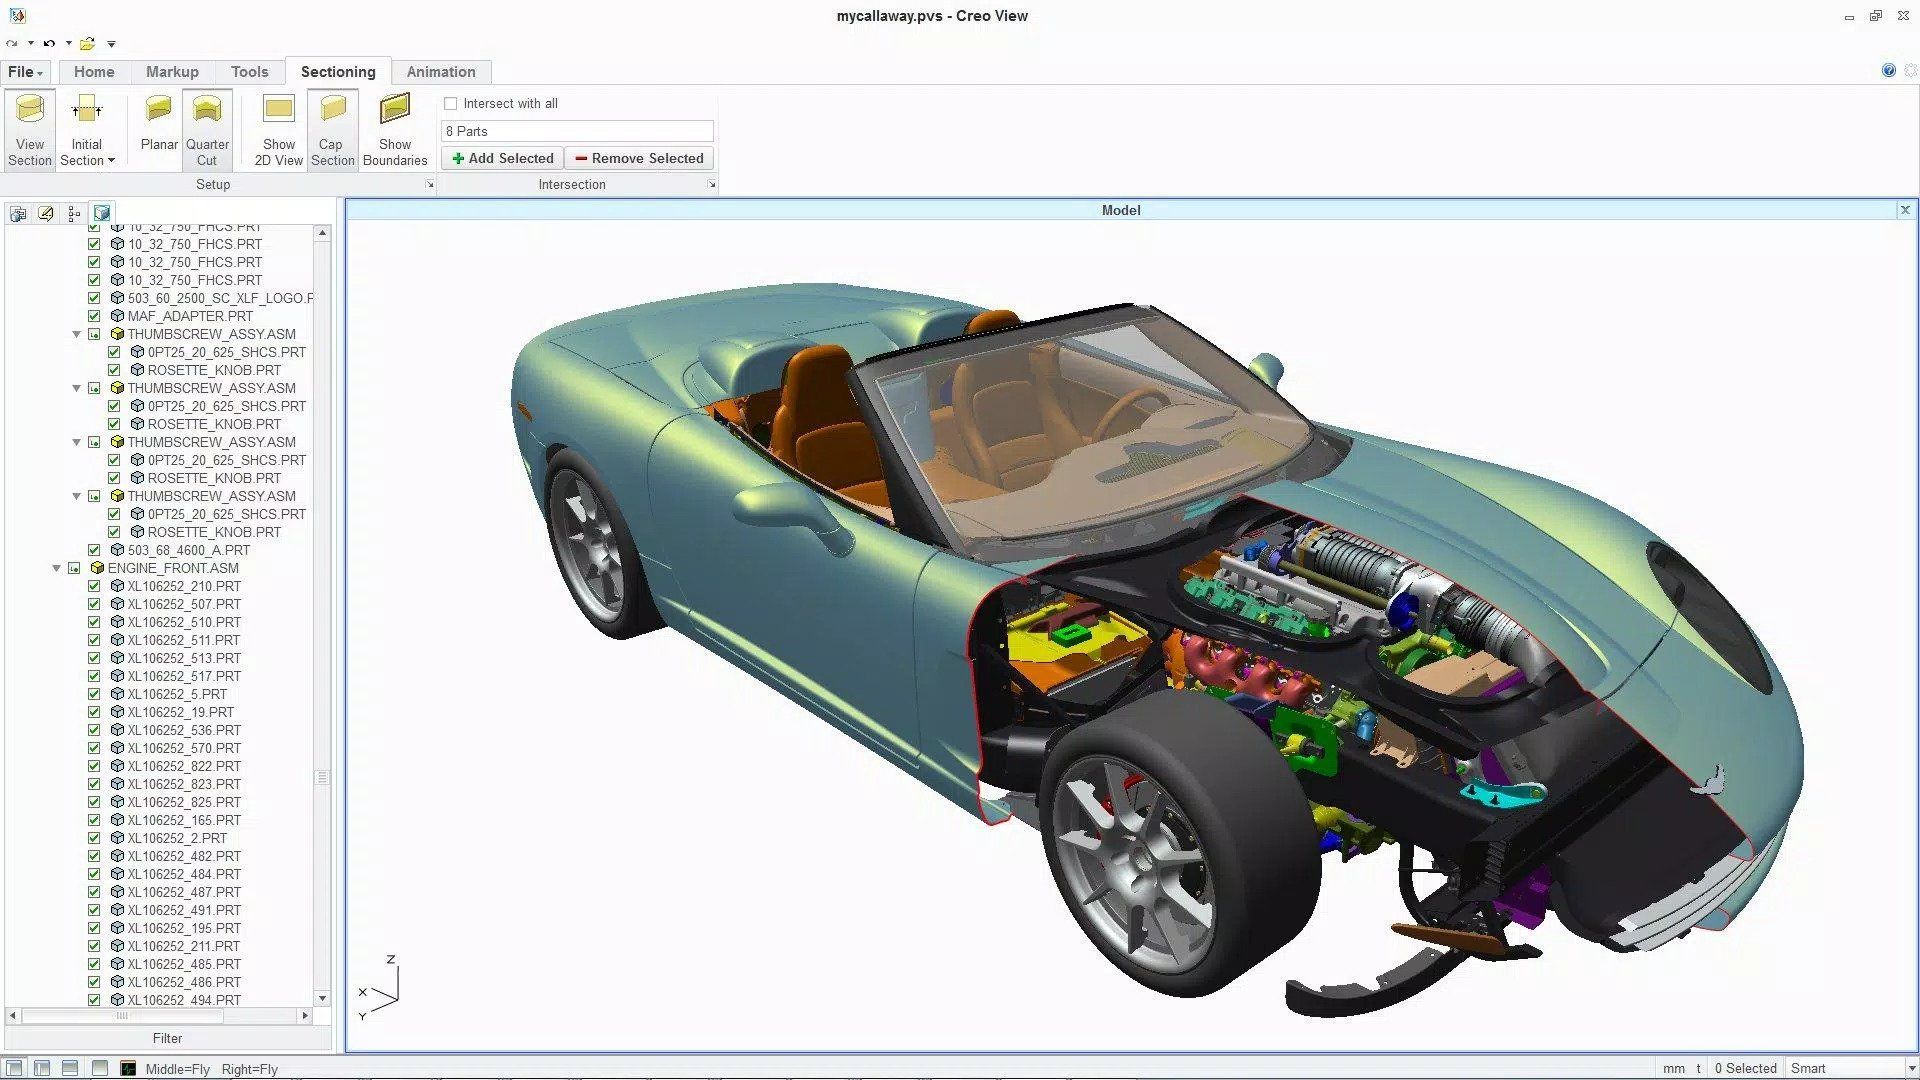 Creo interface and car design with internal components